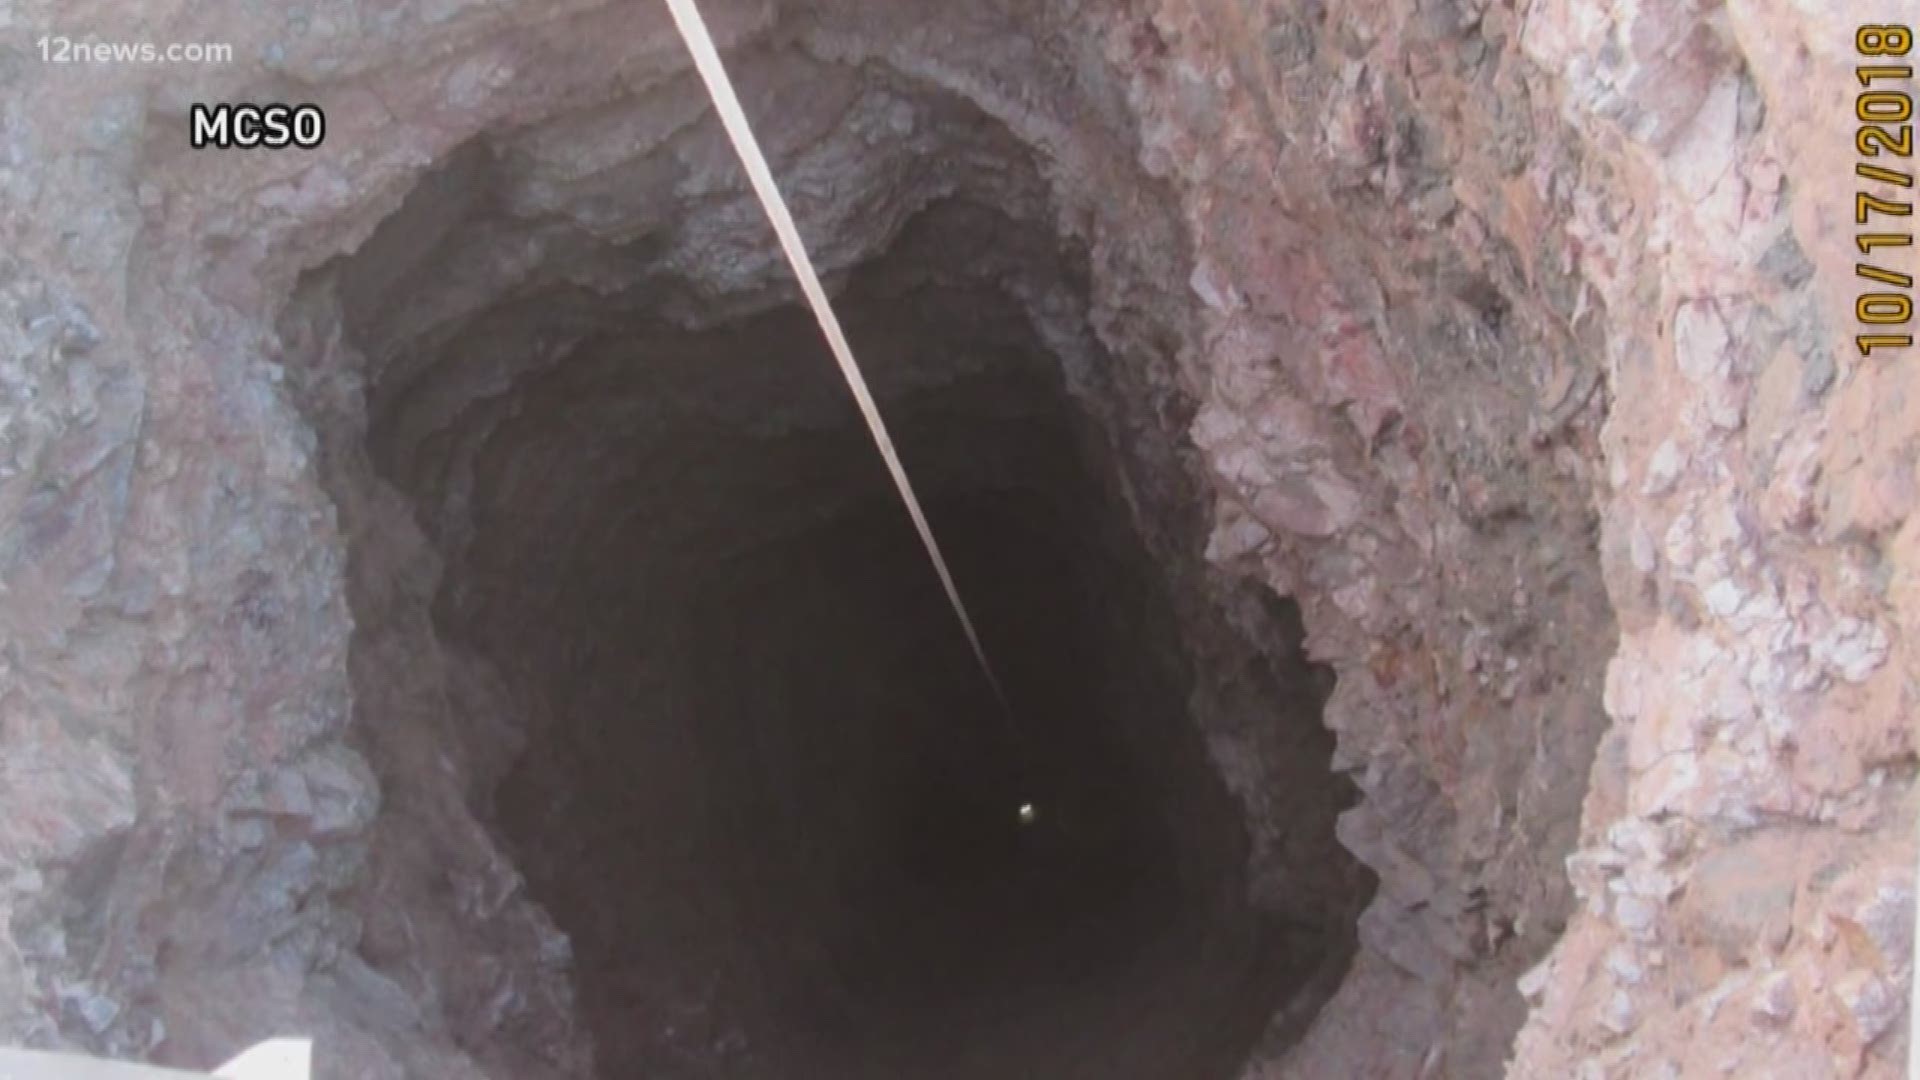 Deputies say a woman fell into an abandoned mine shaft in Cave Creek Sunday night and is now safe. However, this isn't the first time this has happened, and it once again raises the question about who's  responsible for watching Arizona's abandoned mines.